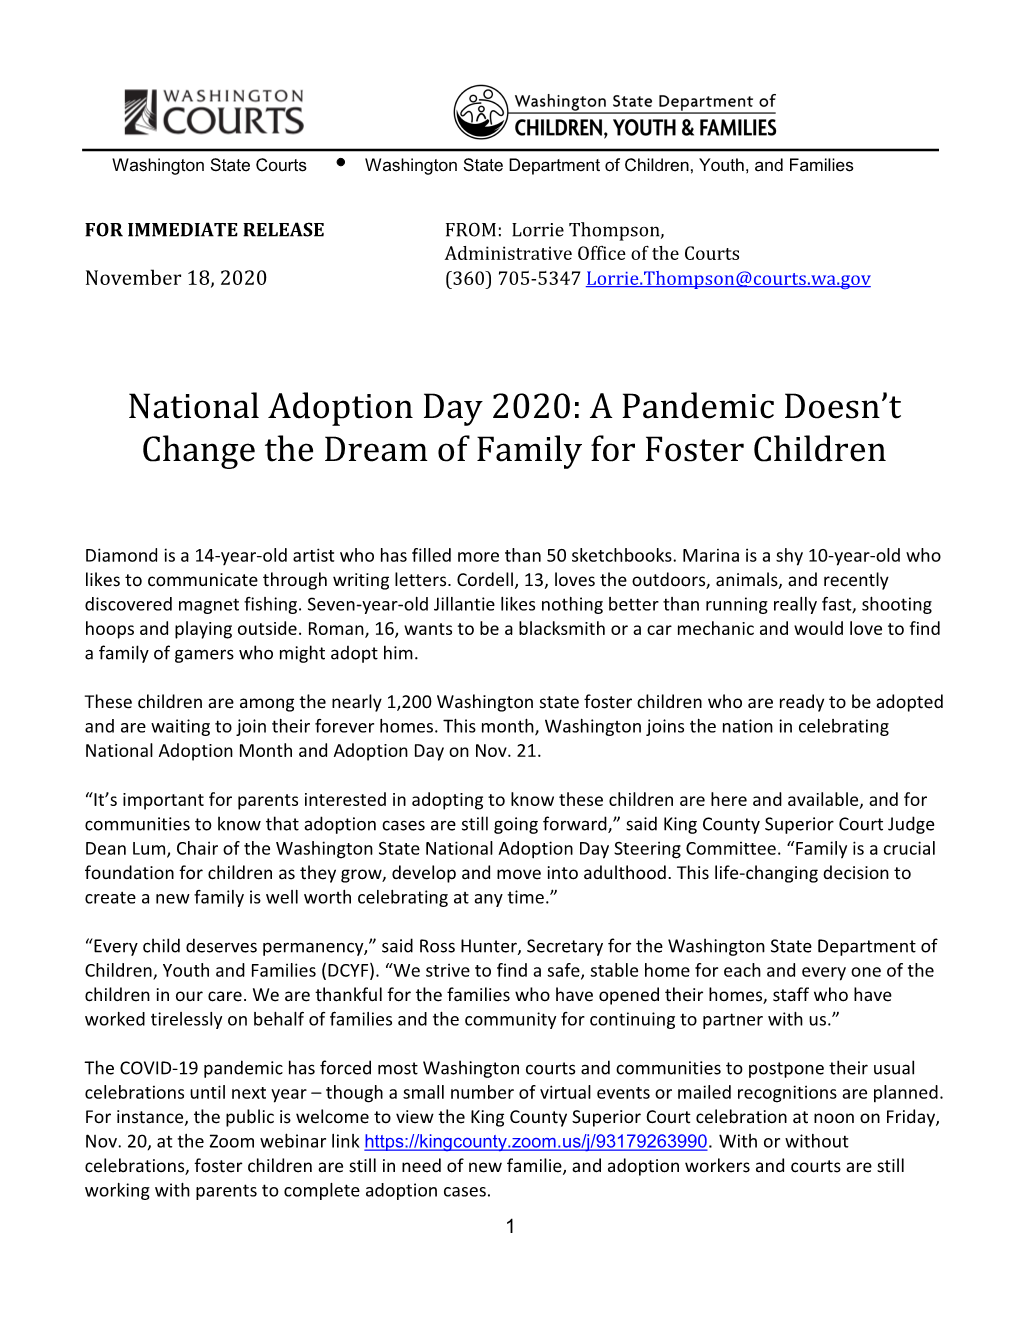 National Adoption Day 2020: a Pandemic Doesn’T Change the Dream of Family for Foster Children